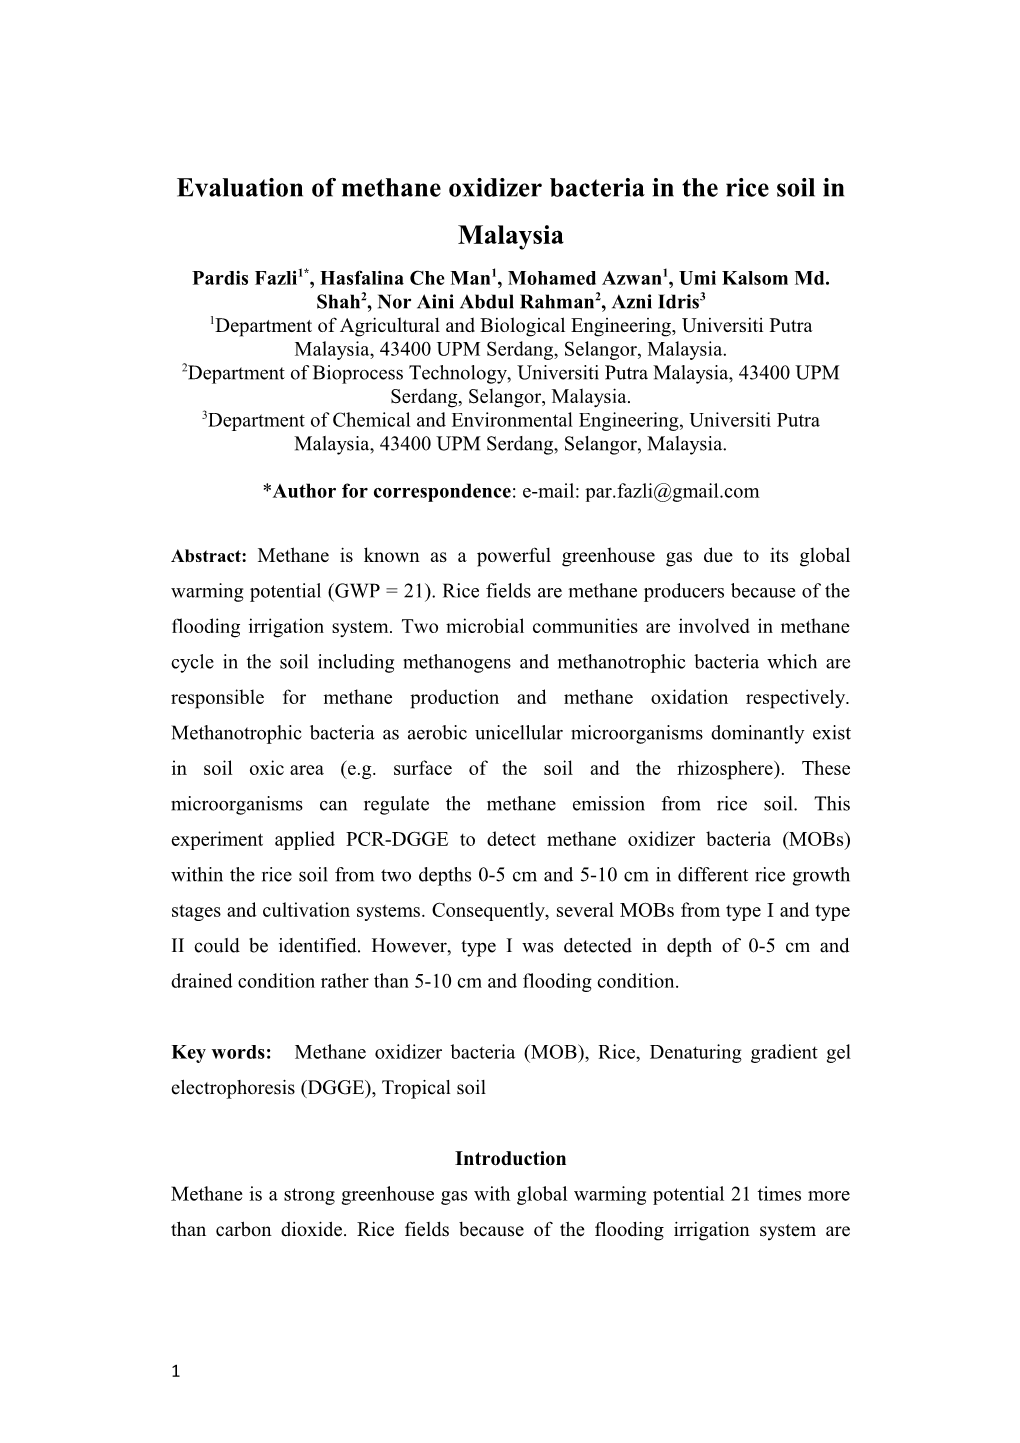 Evaluation of Methane Oxidizer Bacteria in the Rice Soil in Malaysia